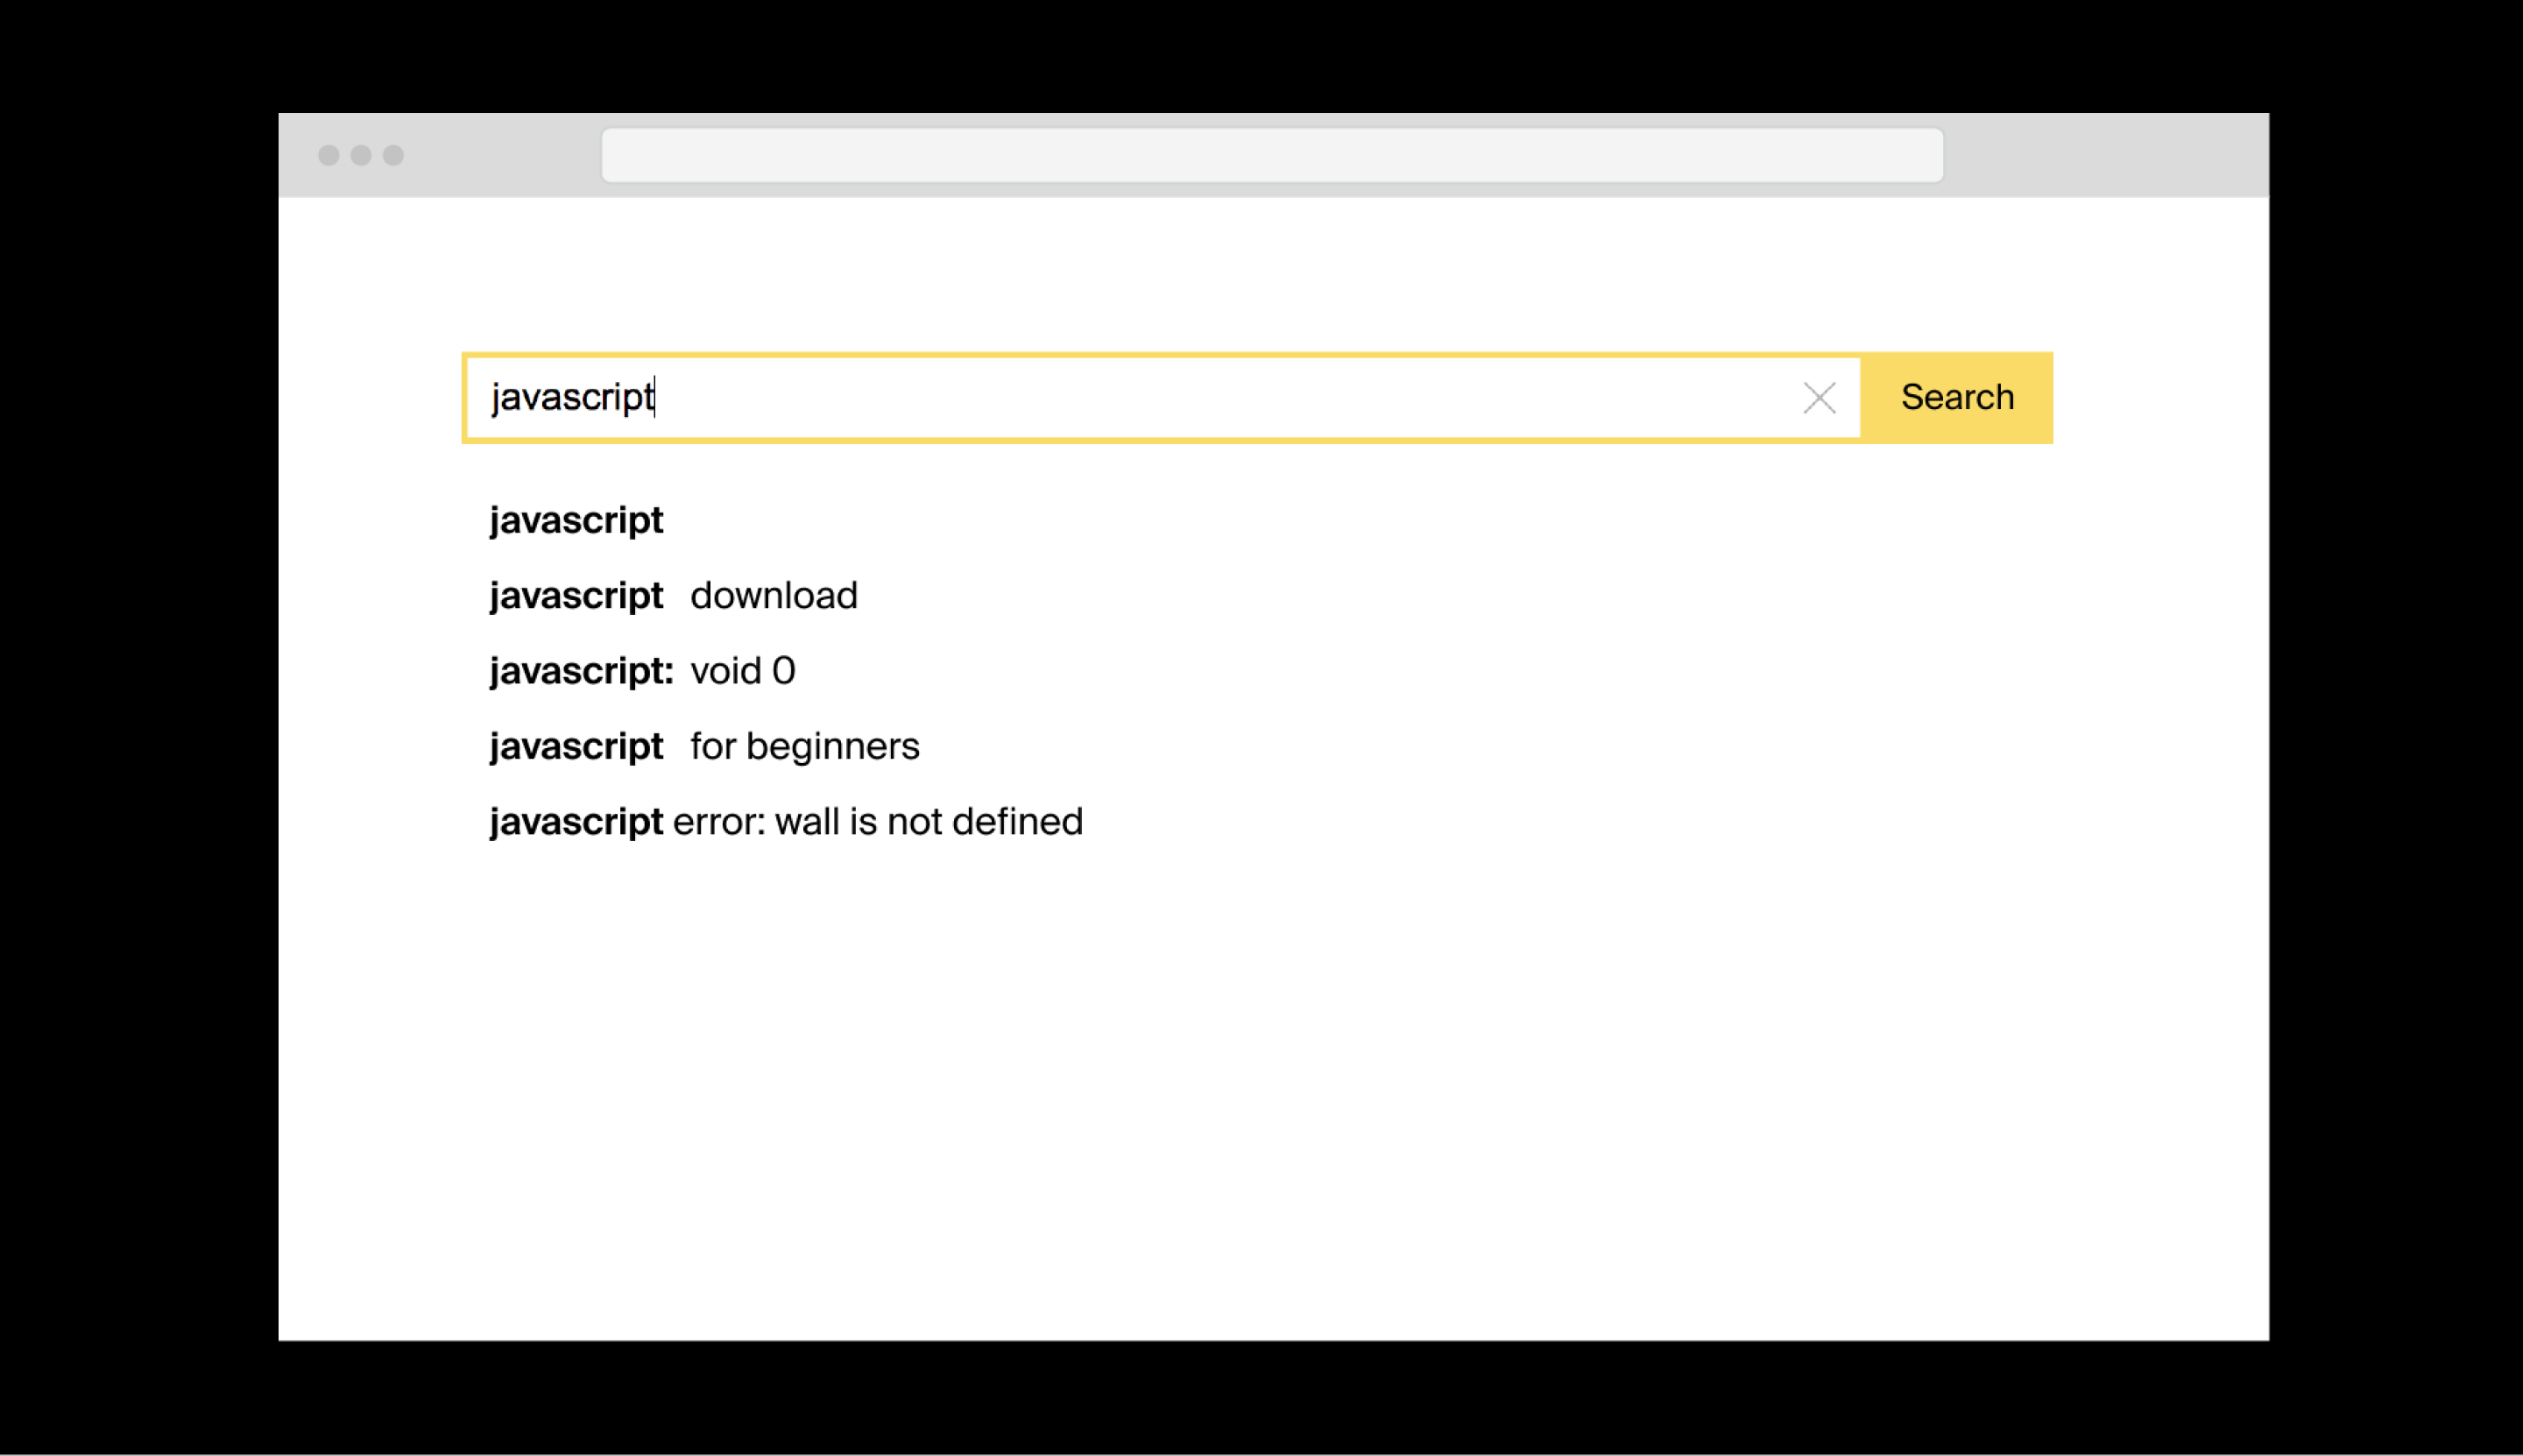 A search bar on the Yandex search page. 'Javascript' is typed into the search bar and there are several drop-down autocomplete suggestions for Javascript.